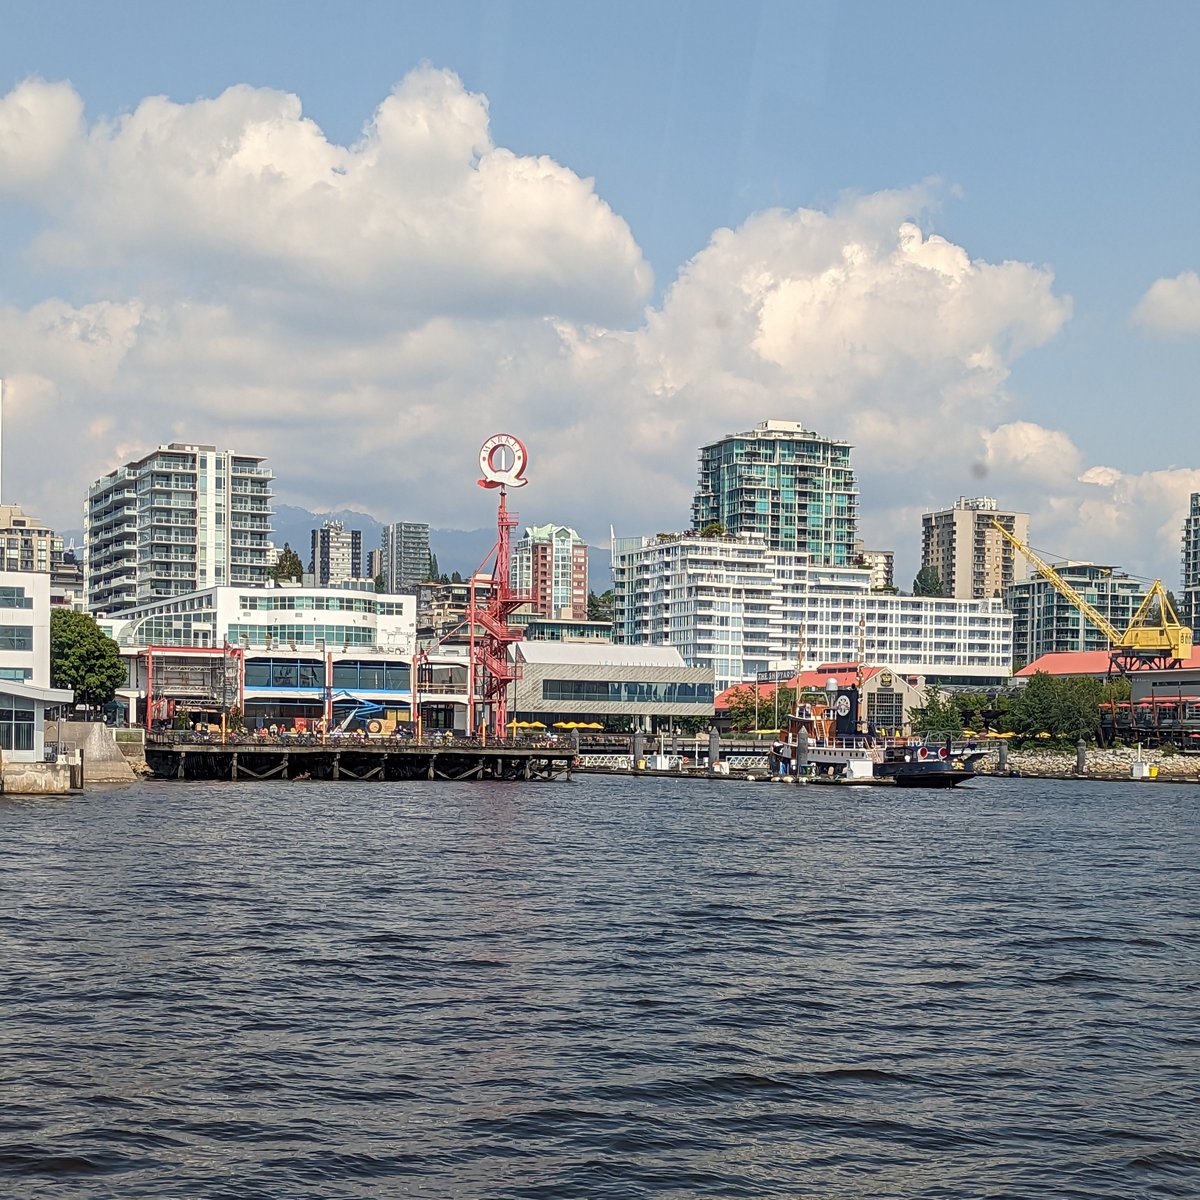 Celebrate Canadian Multiculturalism Day with the VIMFF Summer Fest. This family-friendly, free event is on Saturday June 24 from 3pm-9pm at The Shipyards in North Van. 

theshipyardsdistrict.ca/event/vimff-su…
#VIMFFSummerFest #Shipyards #LonsdaleQuay #NorthVan